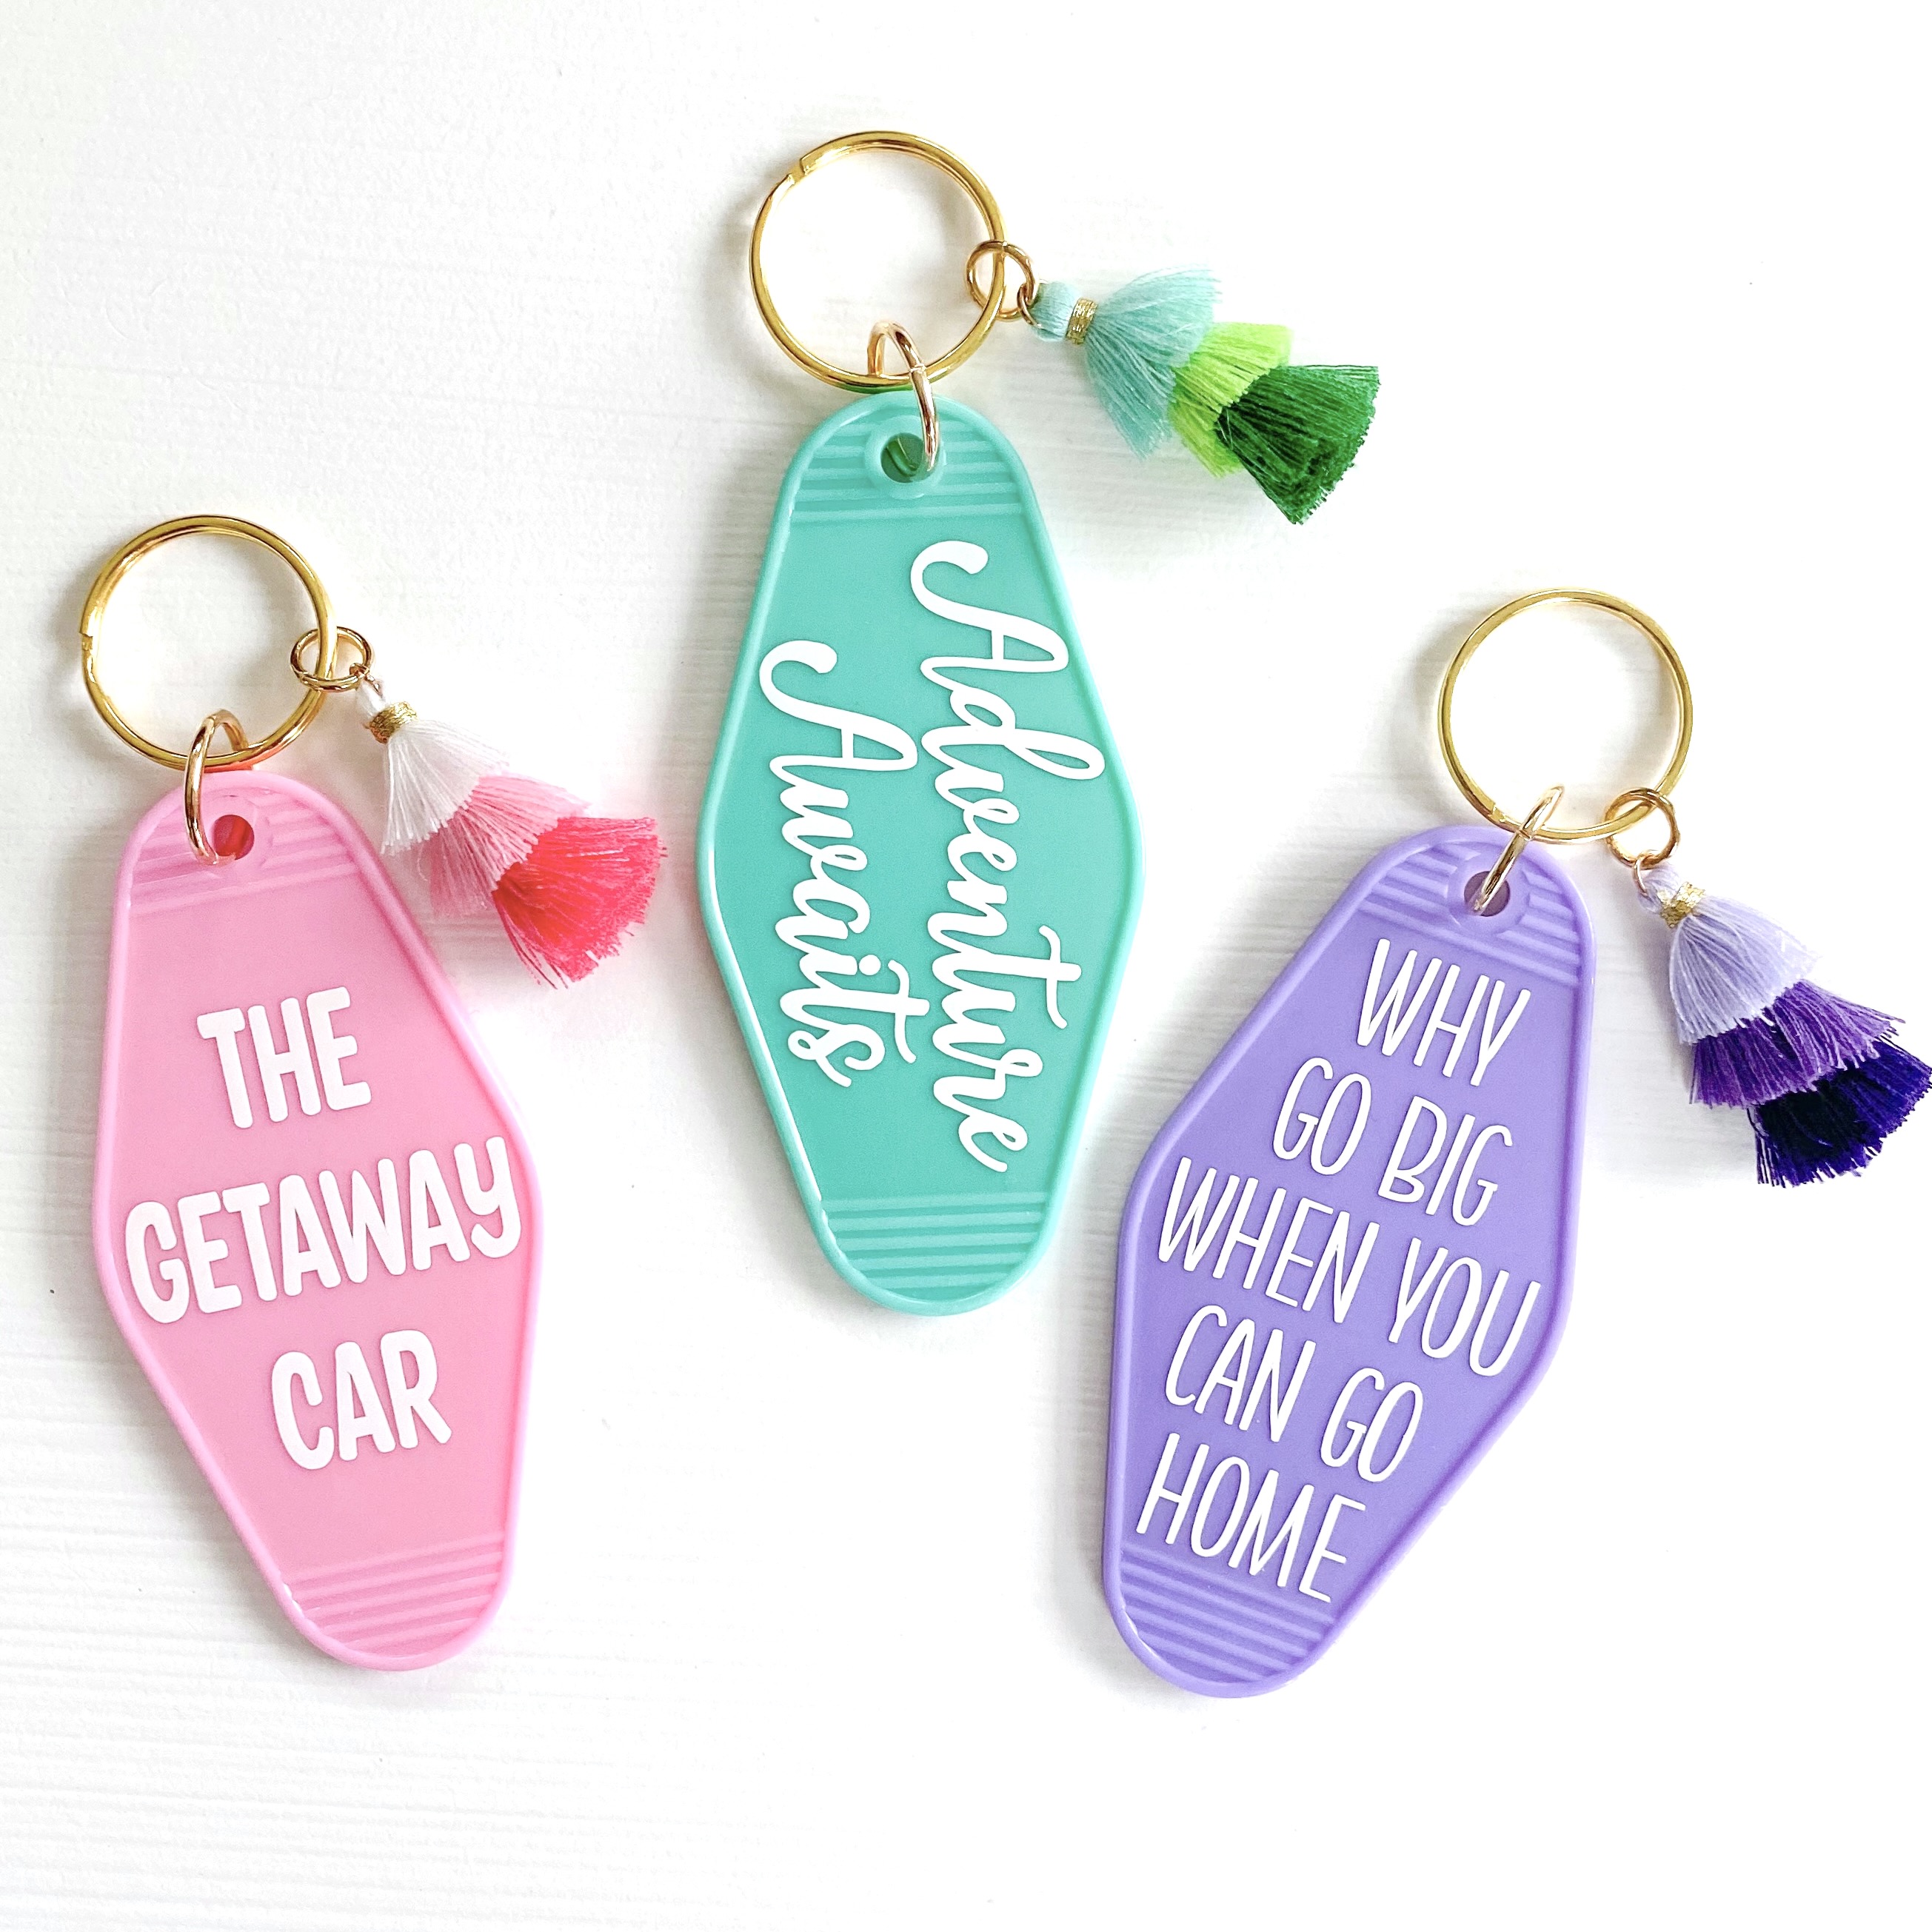 How to Make Keychains Using Permanent Adhesive Vinyl & Transfer